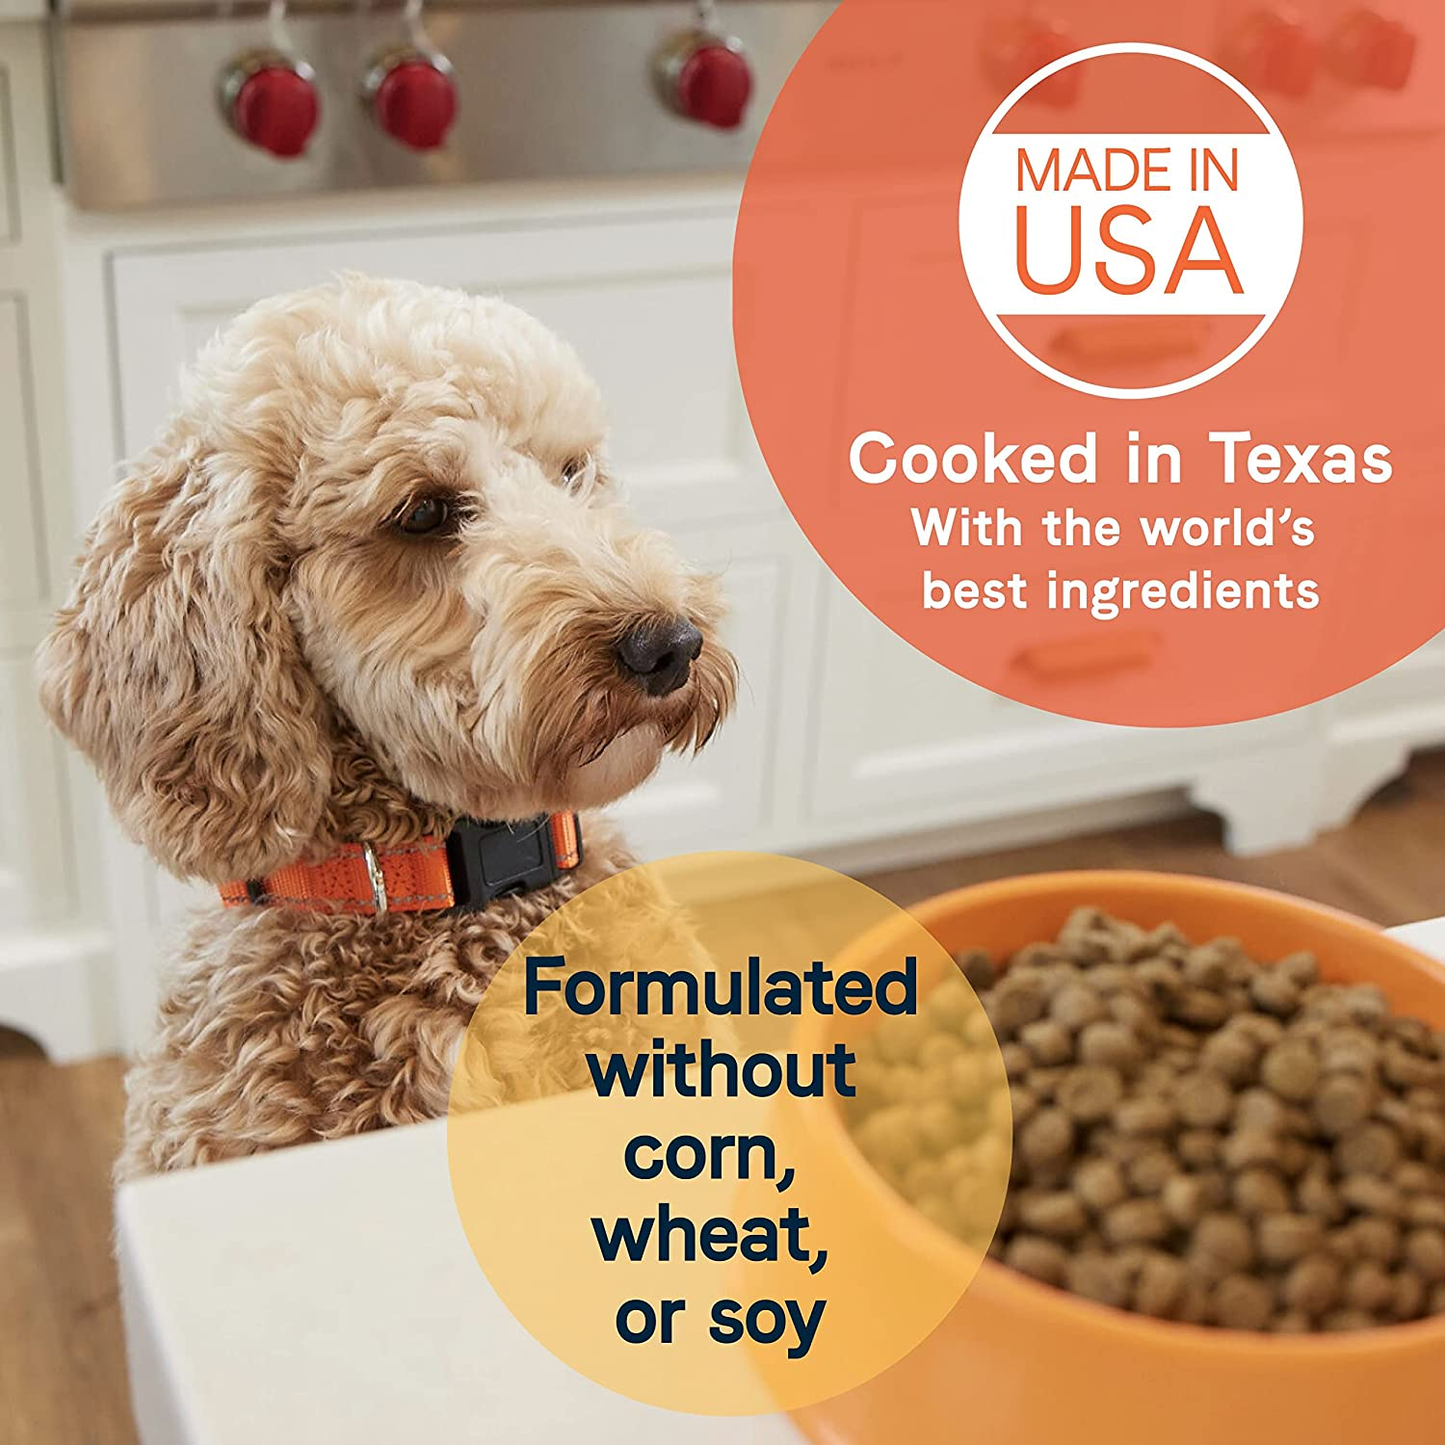 All Life Stages Premium Dry Dog Food for Less Active Dogs, All Ages Chicken, Turkey and Lamb Meals Formula, 15 Pounds